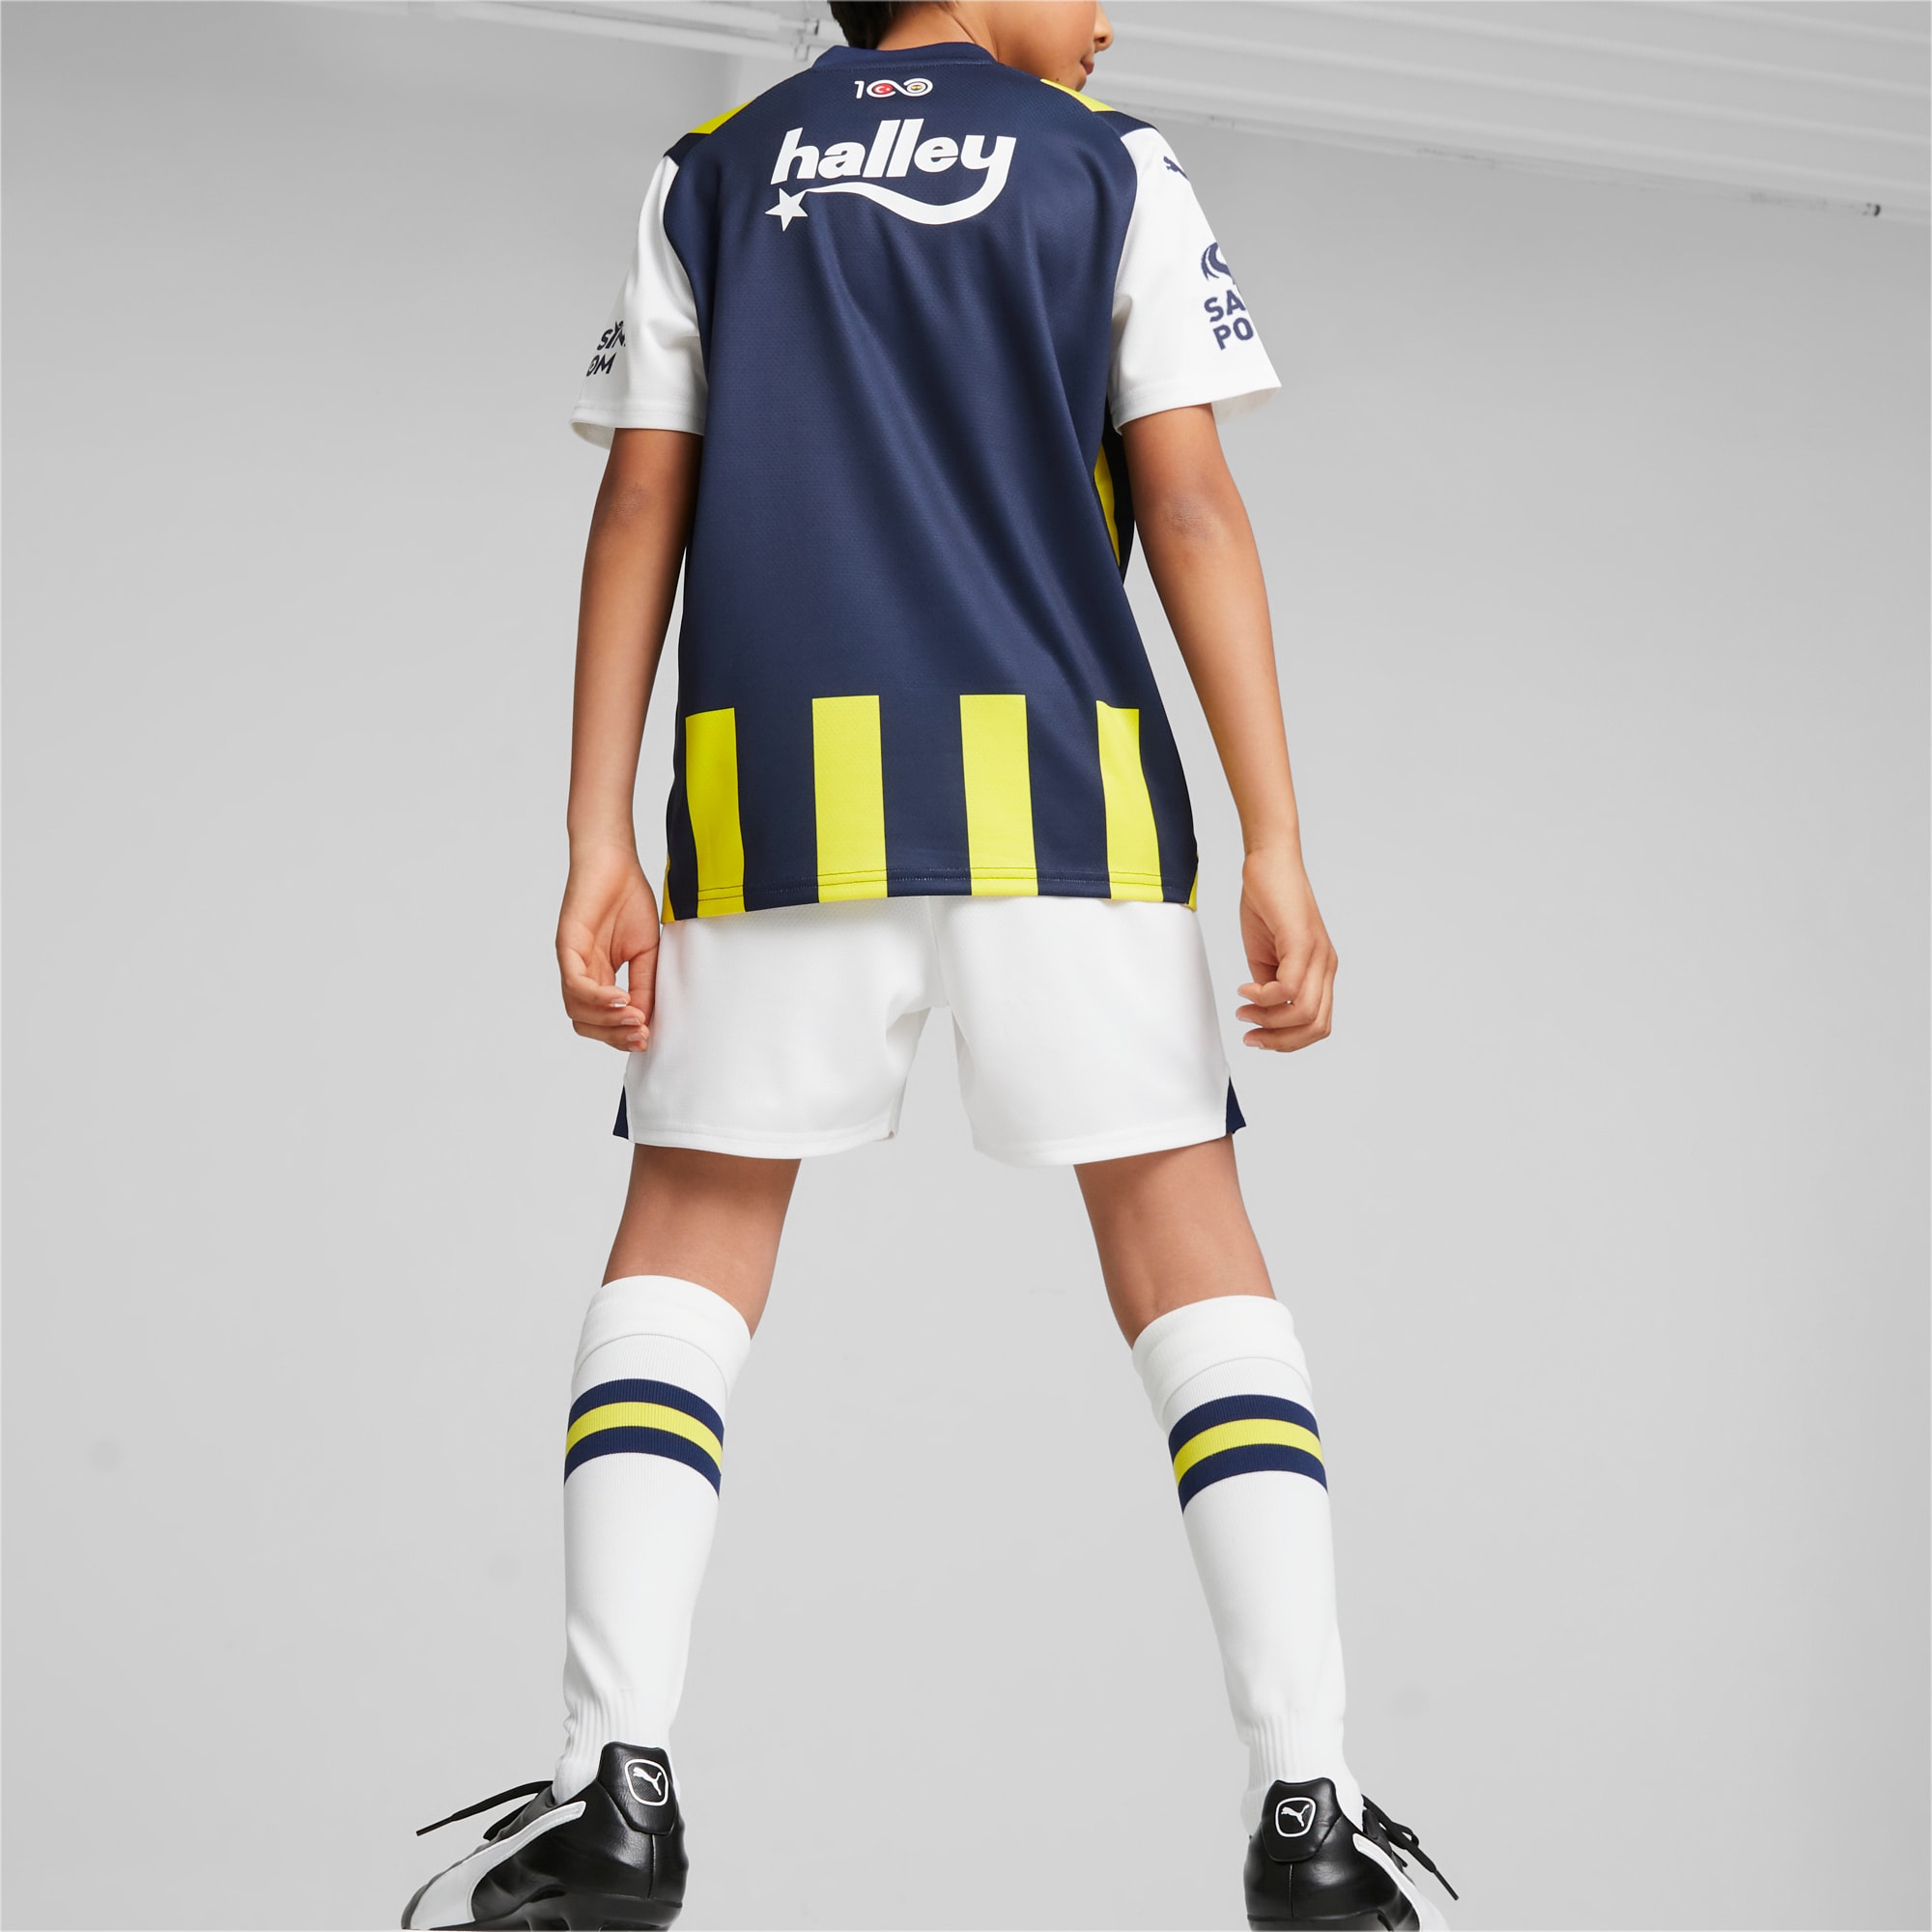 PUMA Fenerbahçe S.K. 23/24 Home Jersey Youth, Medieval Blue/Blazing Yellow/White, Size 116, Clothing